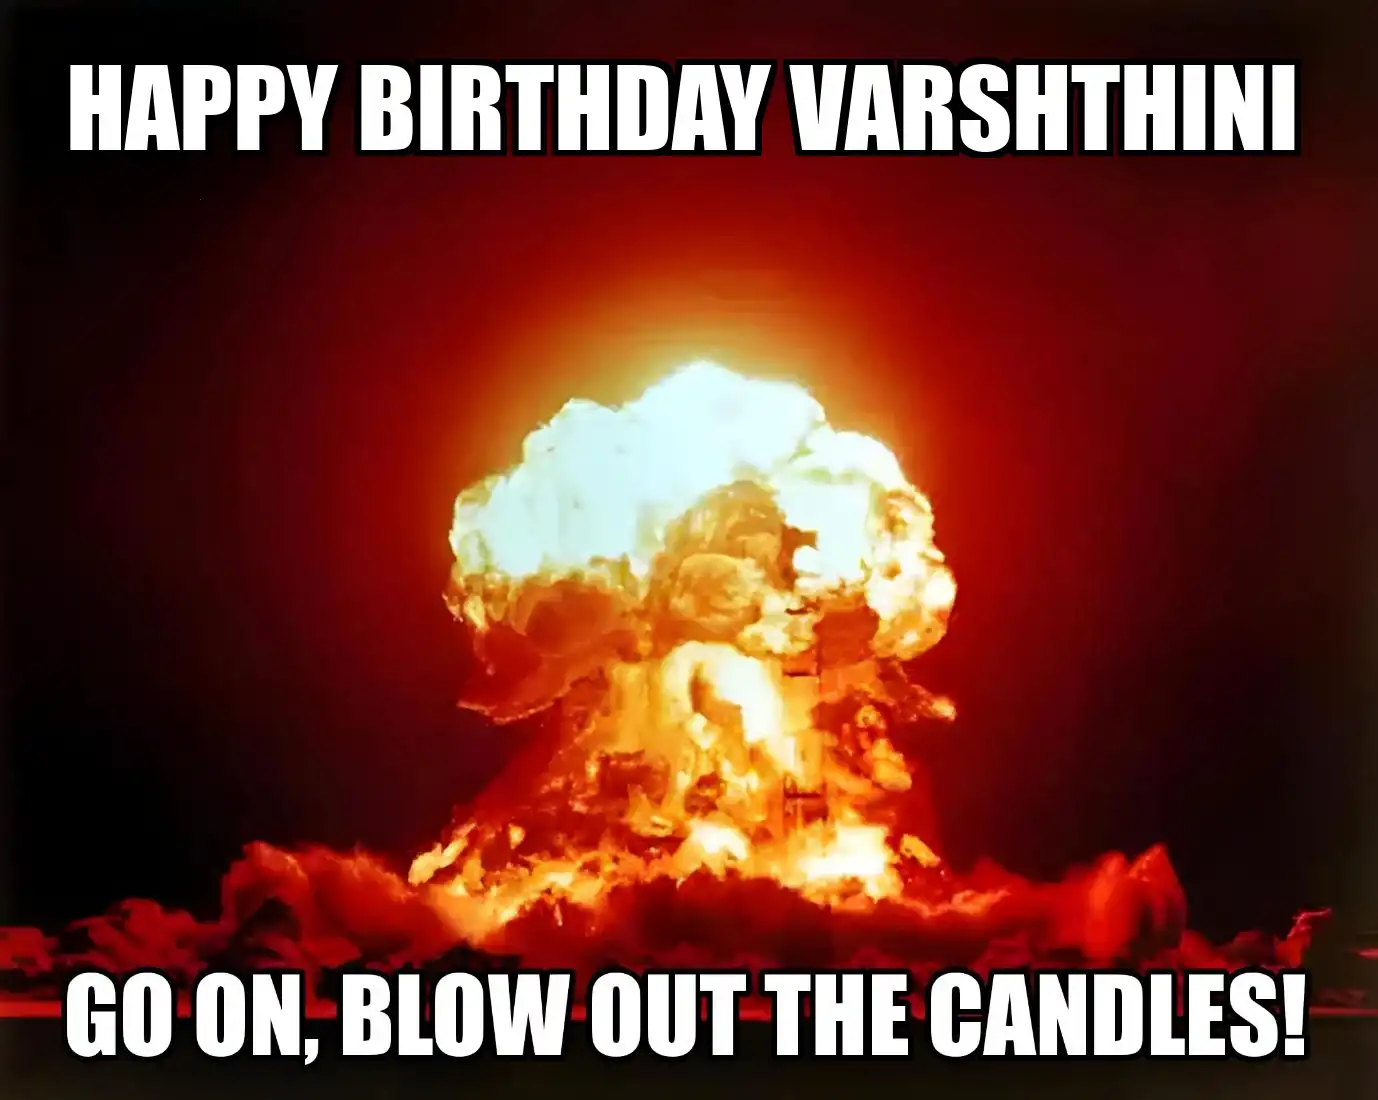 Happy Birthday Varshthini Go On Blow Out The Candles Meme